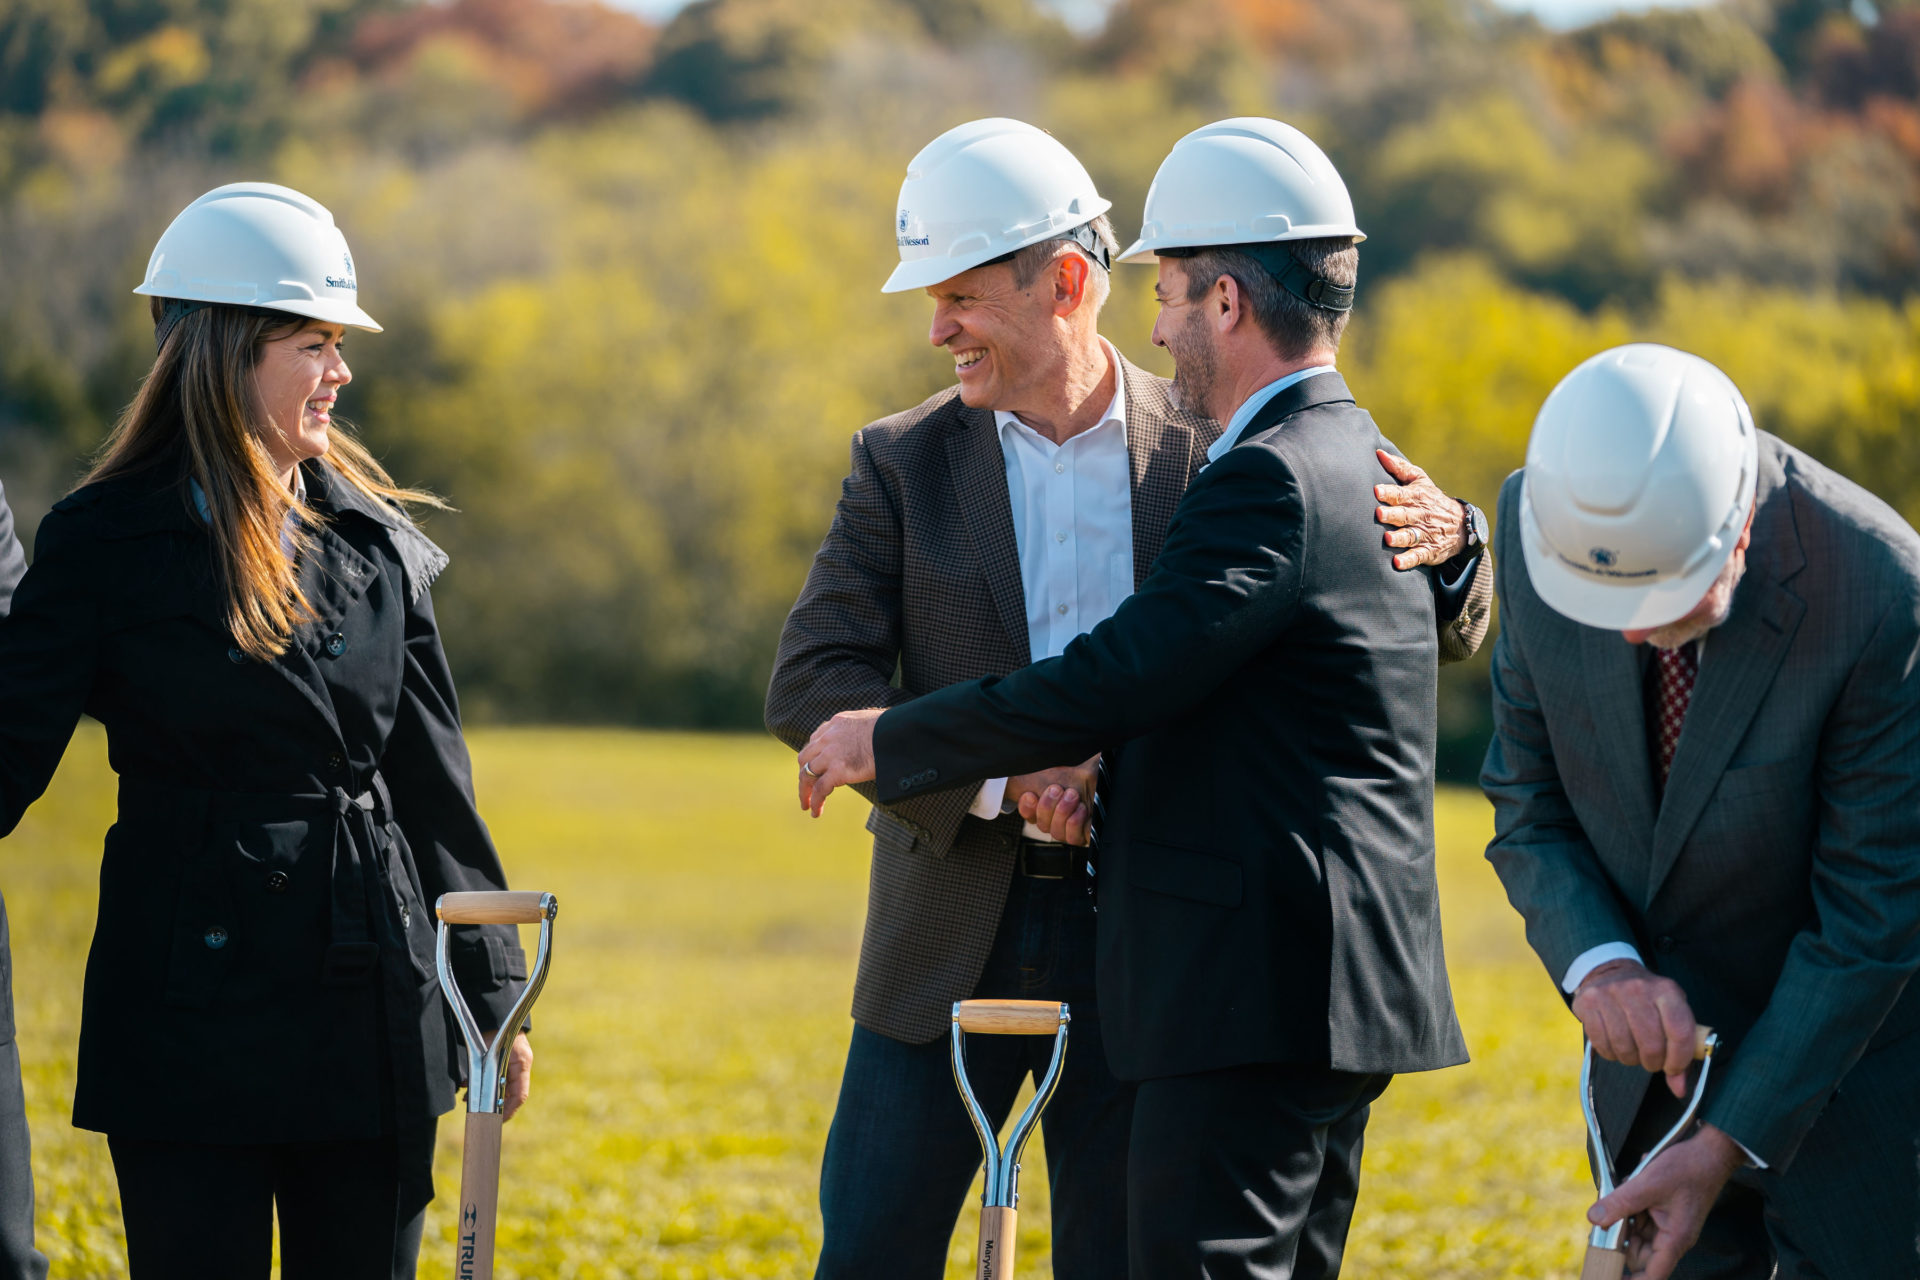 Event photography of four people wearing white helmets and conversing at a groundbreaking event in East TN.